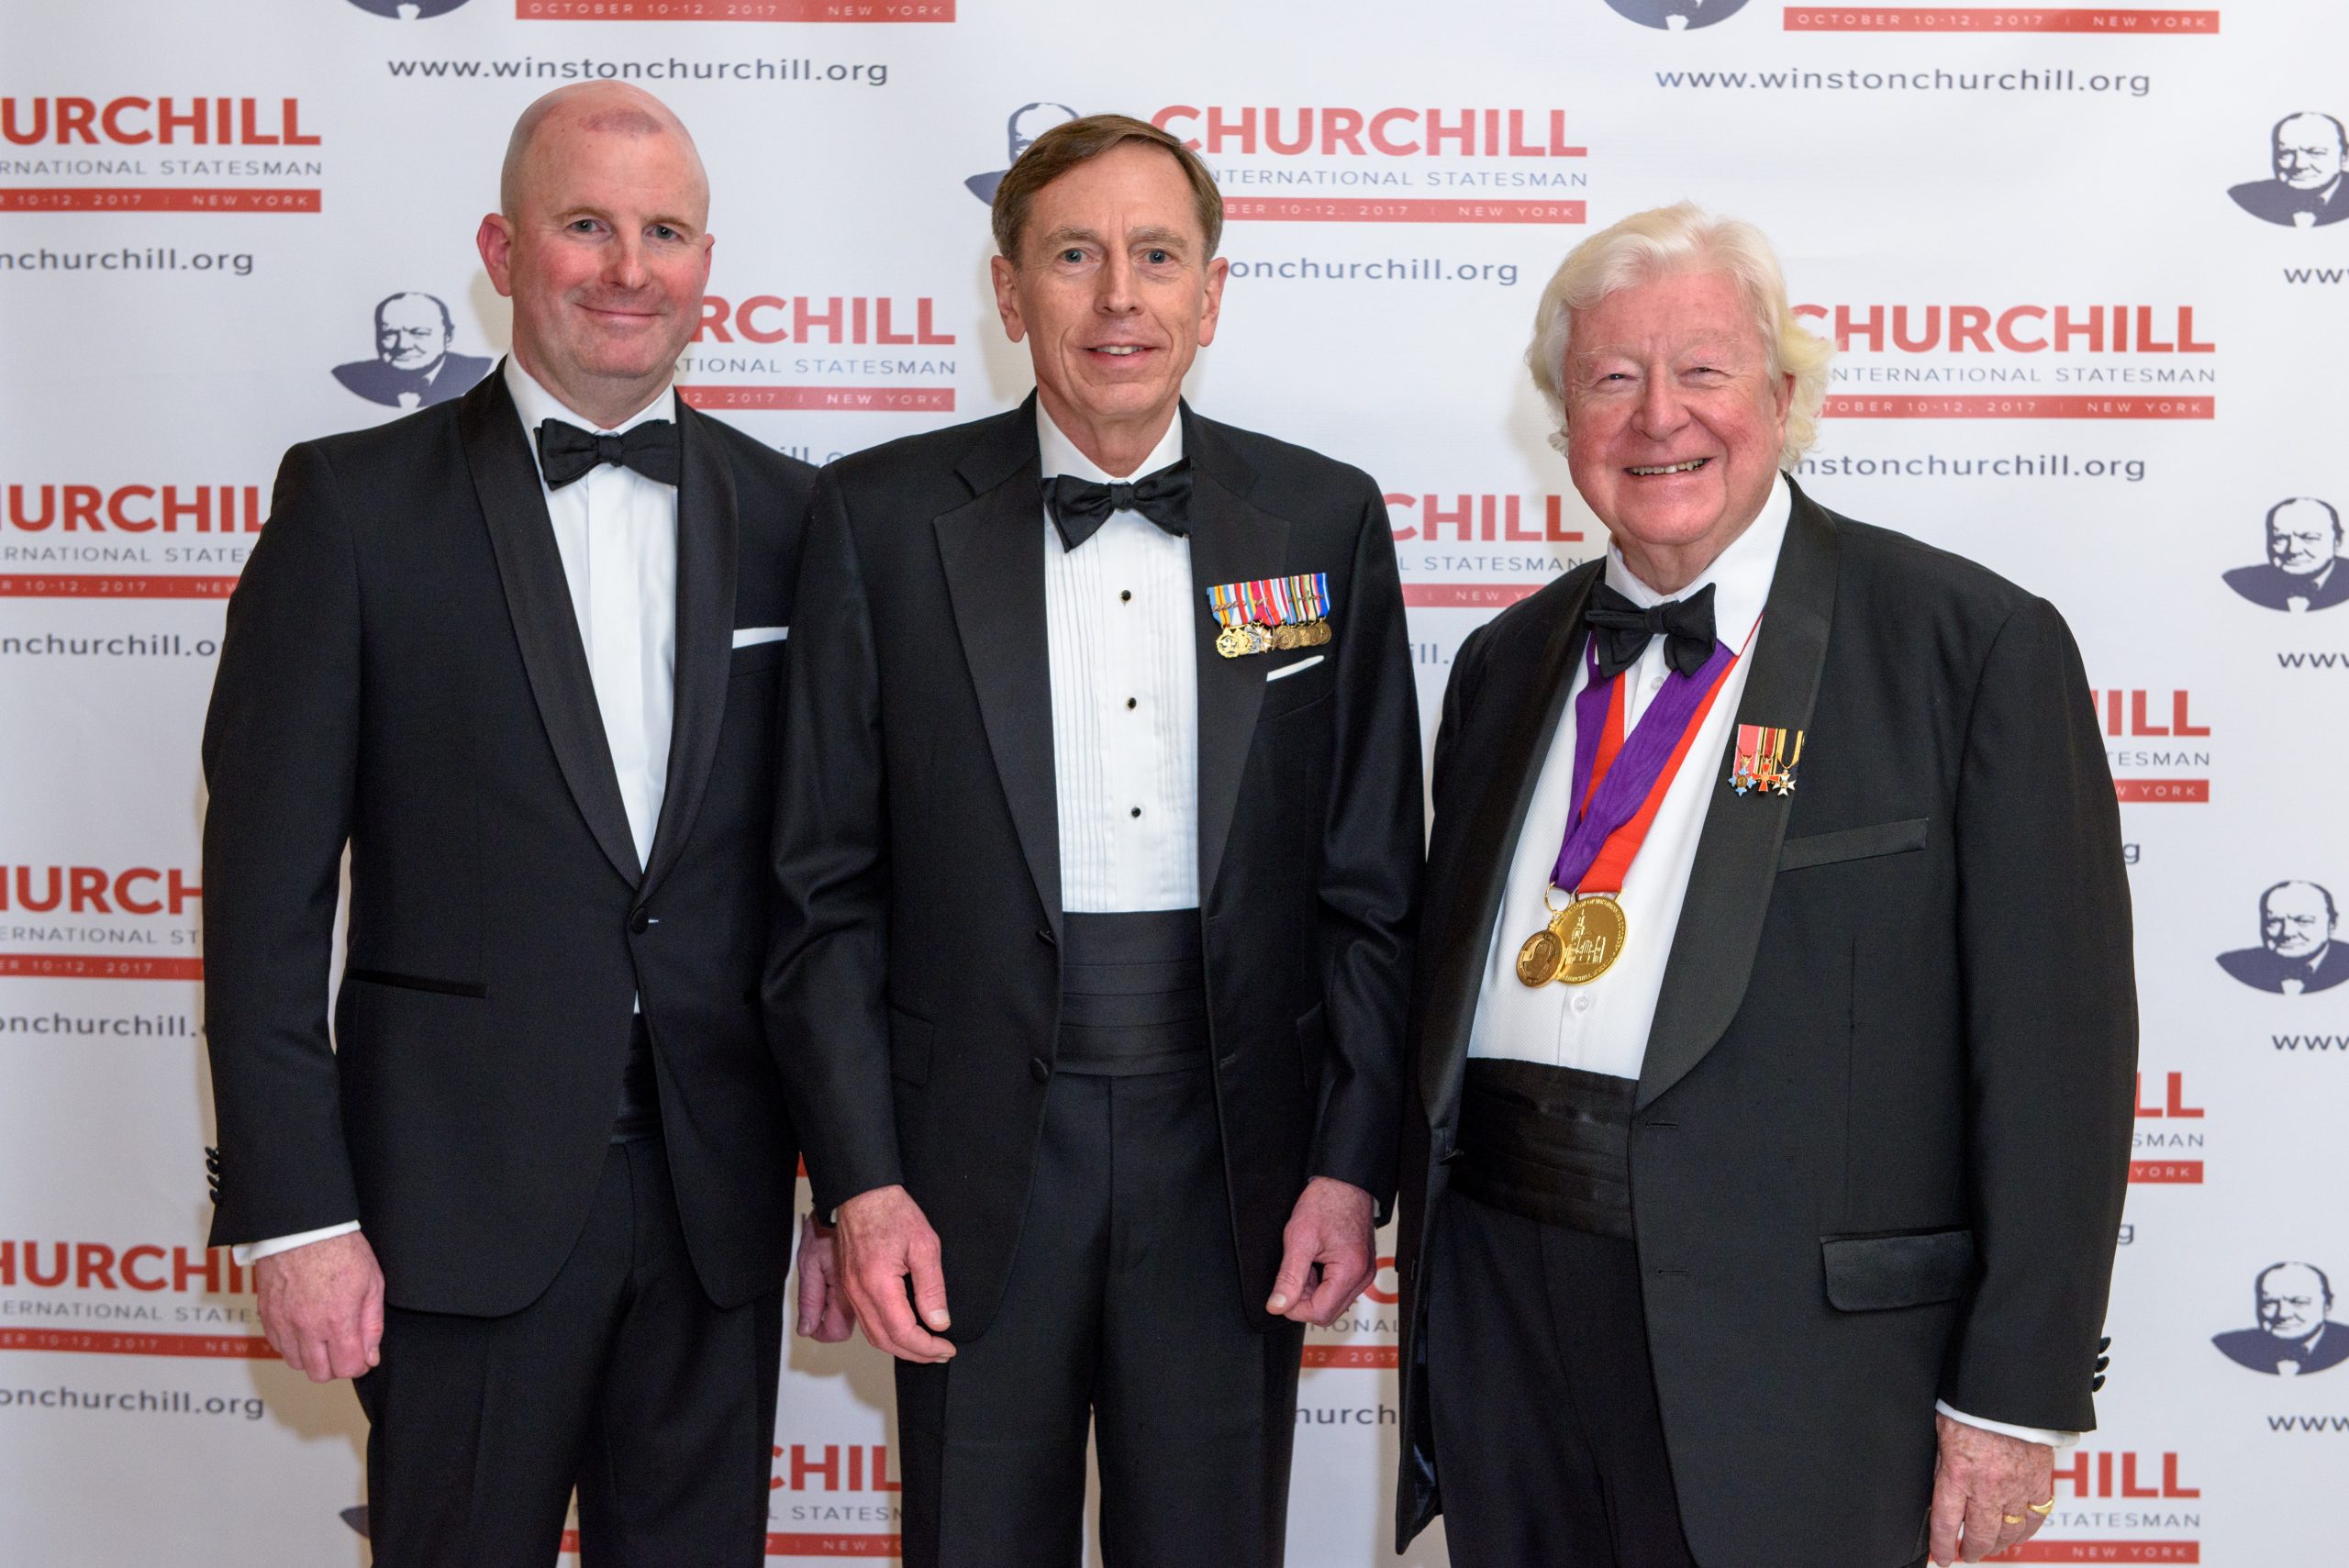 International Churchill Society Executive Director Michael F. Bishop is joined by Gen. David Petraeus and Lord Watson at the 2017 ICS Conference in New York.